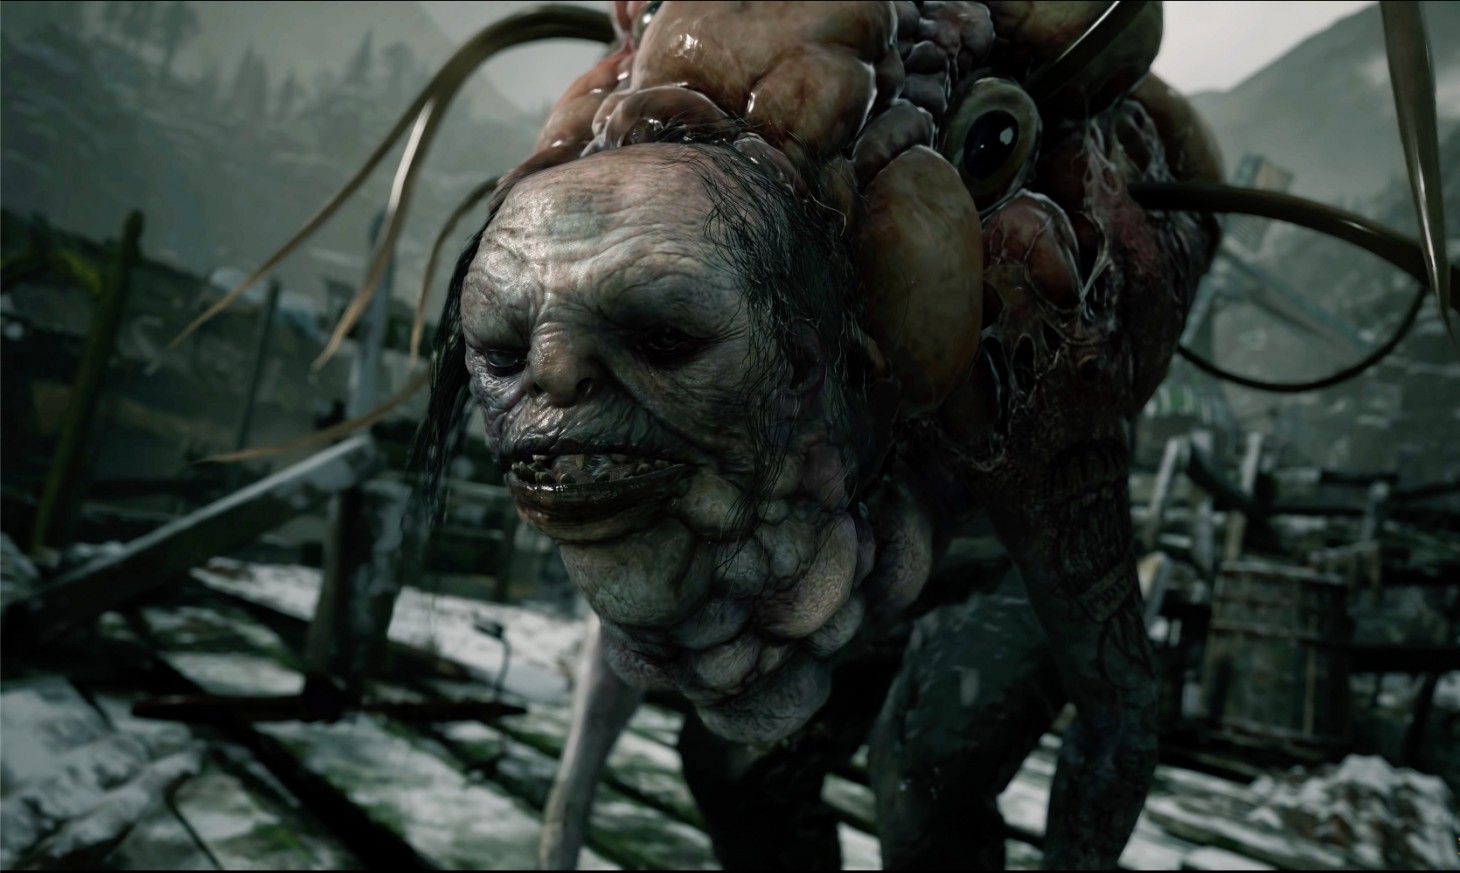 Is Resident Evil Village Scary? Not Really, and That's Okay